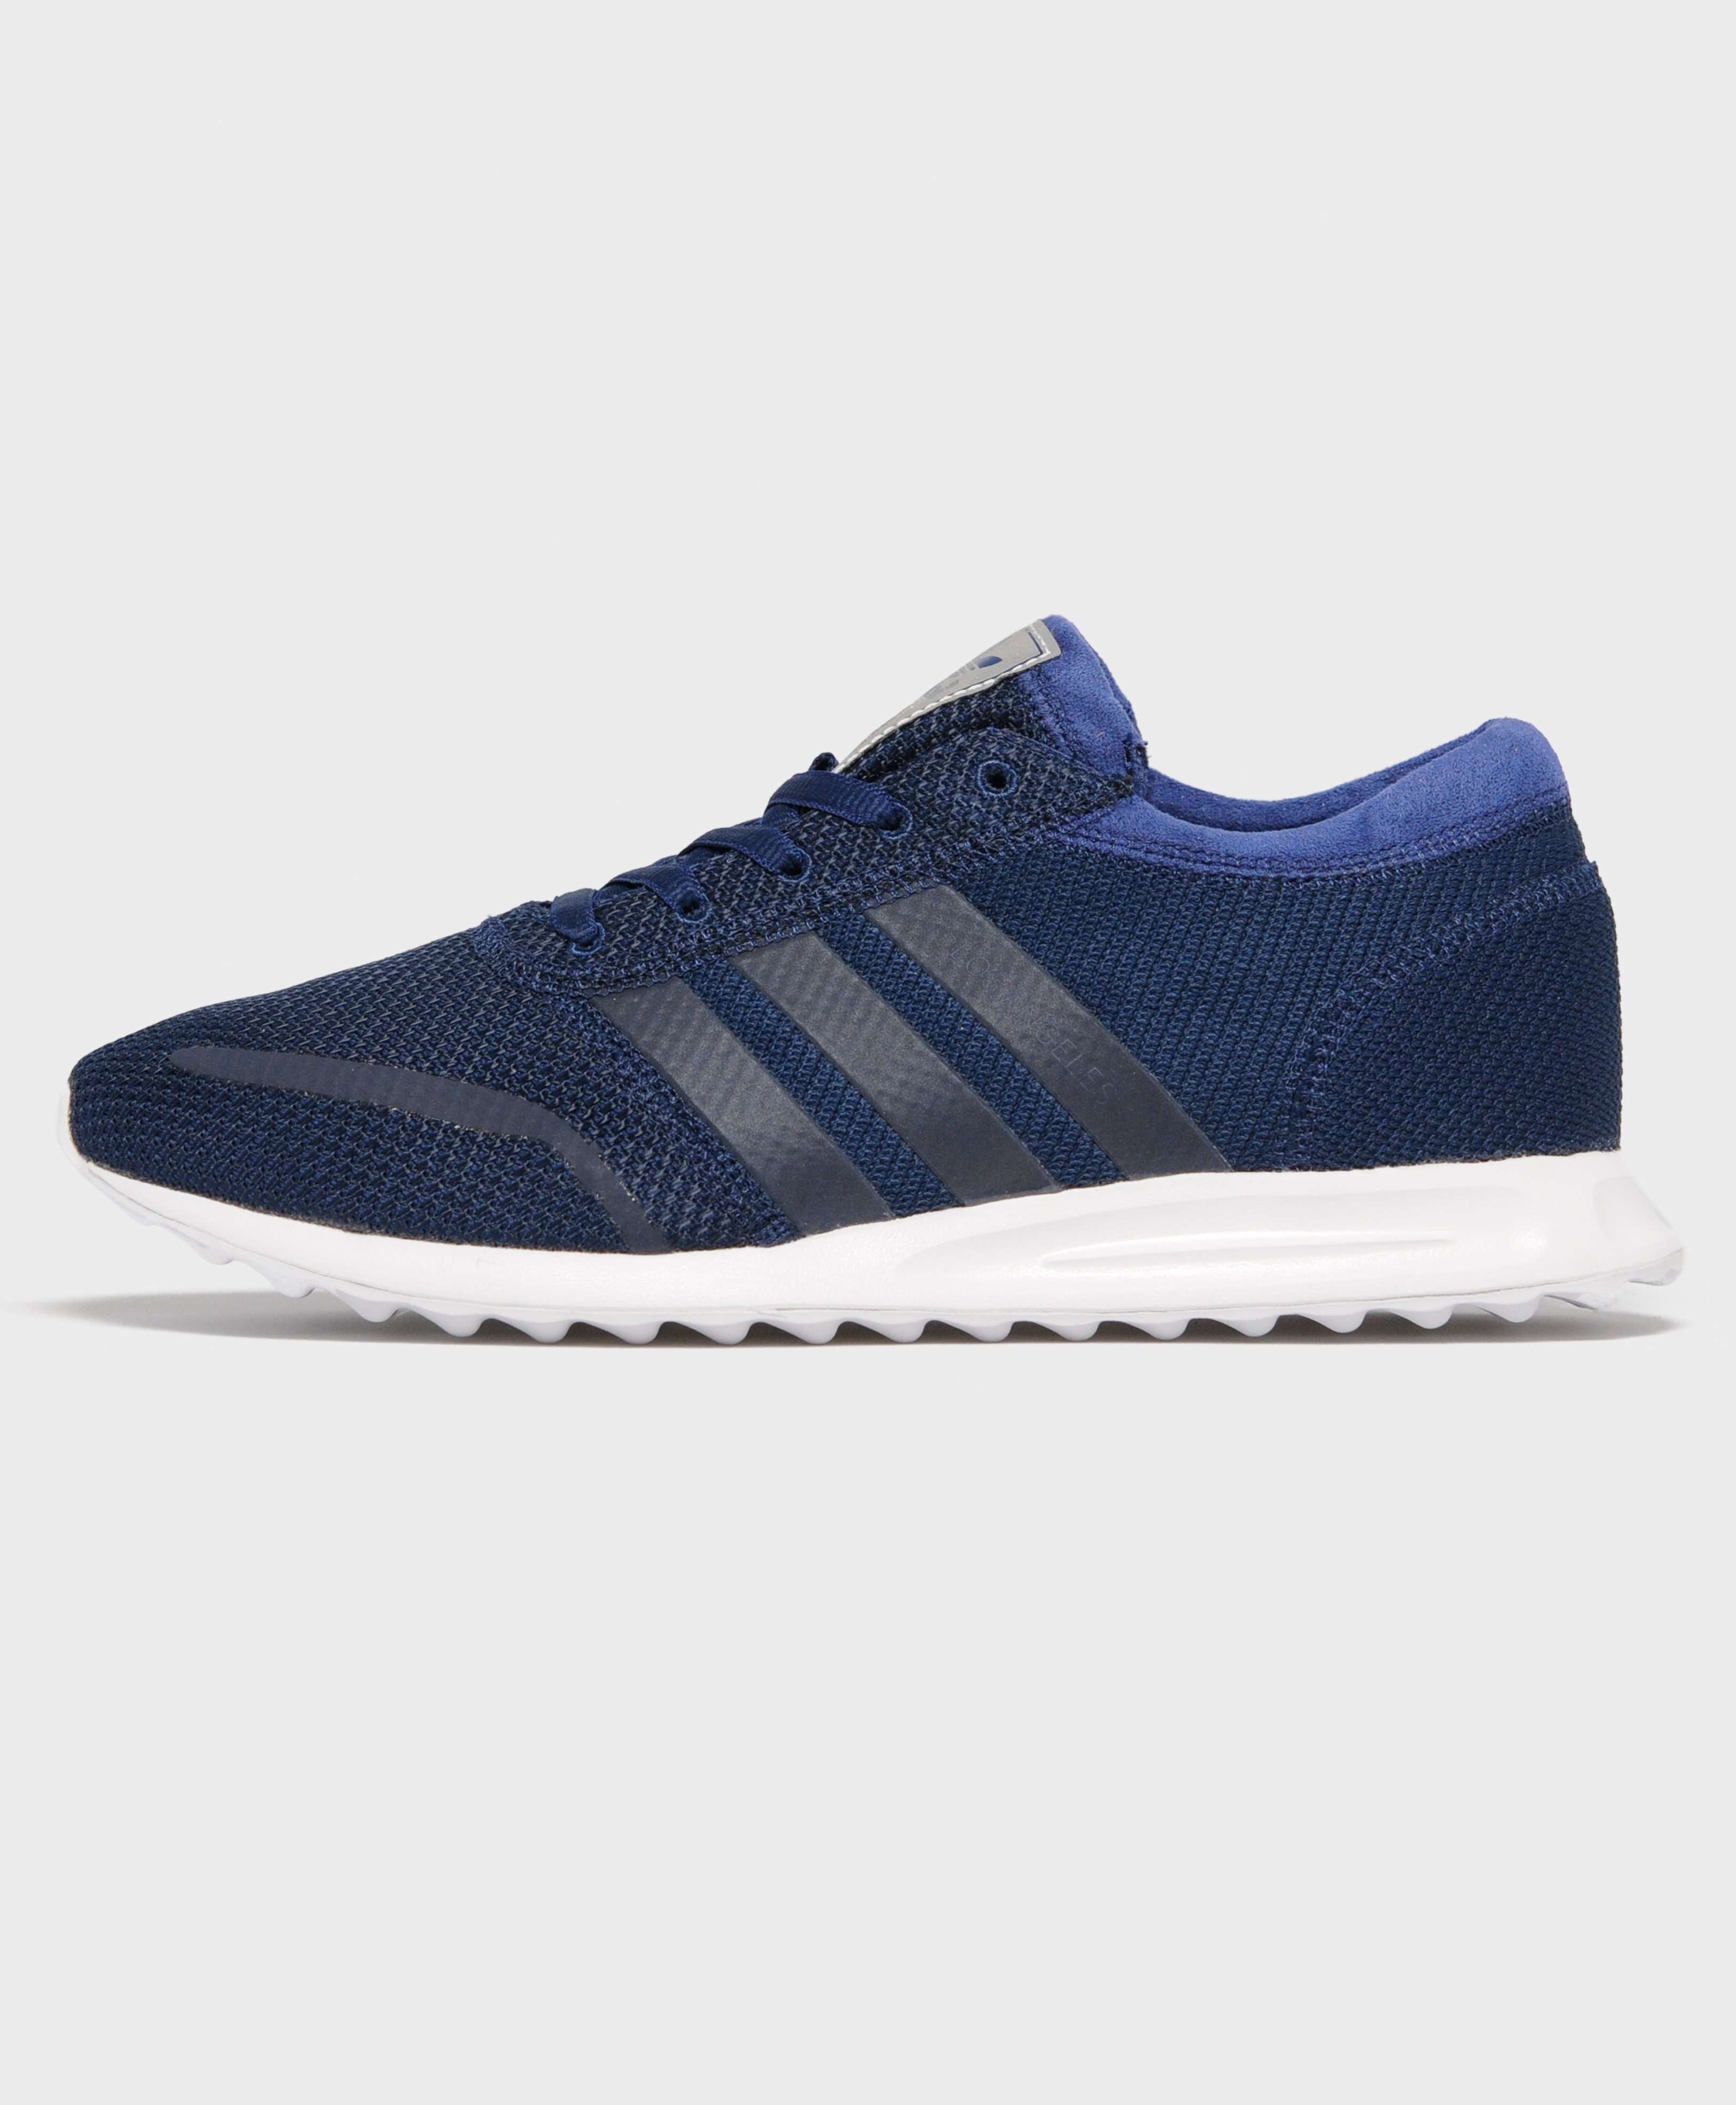 Adidas Originals Trainers And Shoes Scotts Menswear